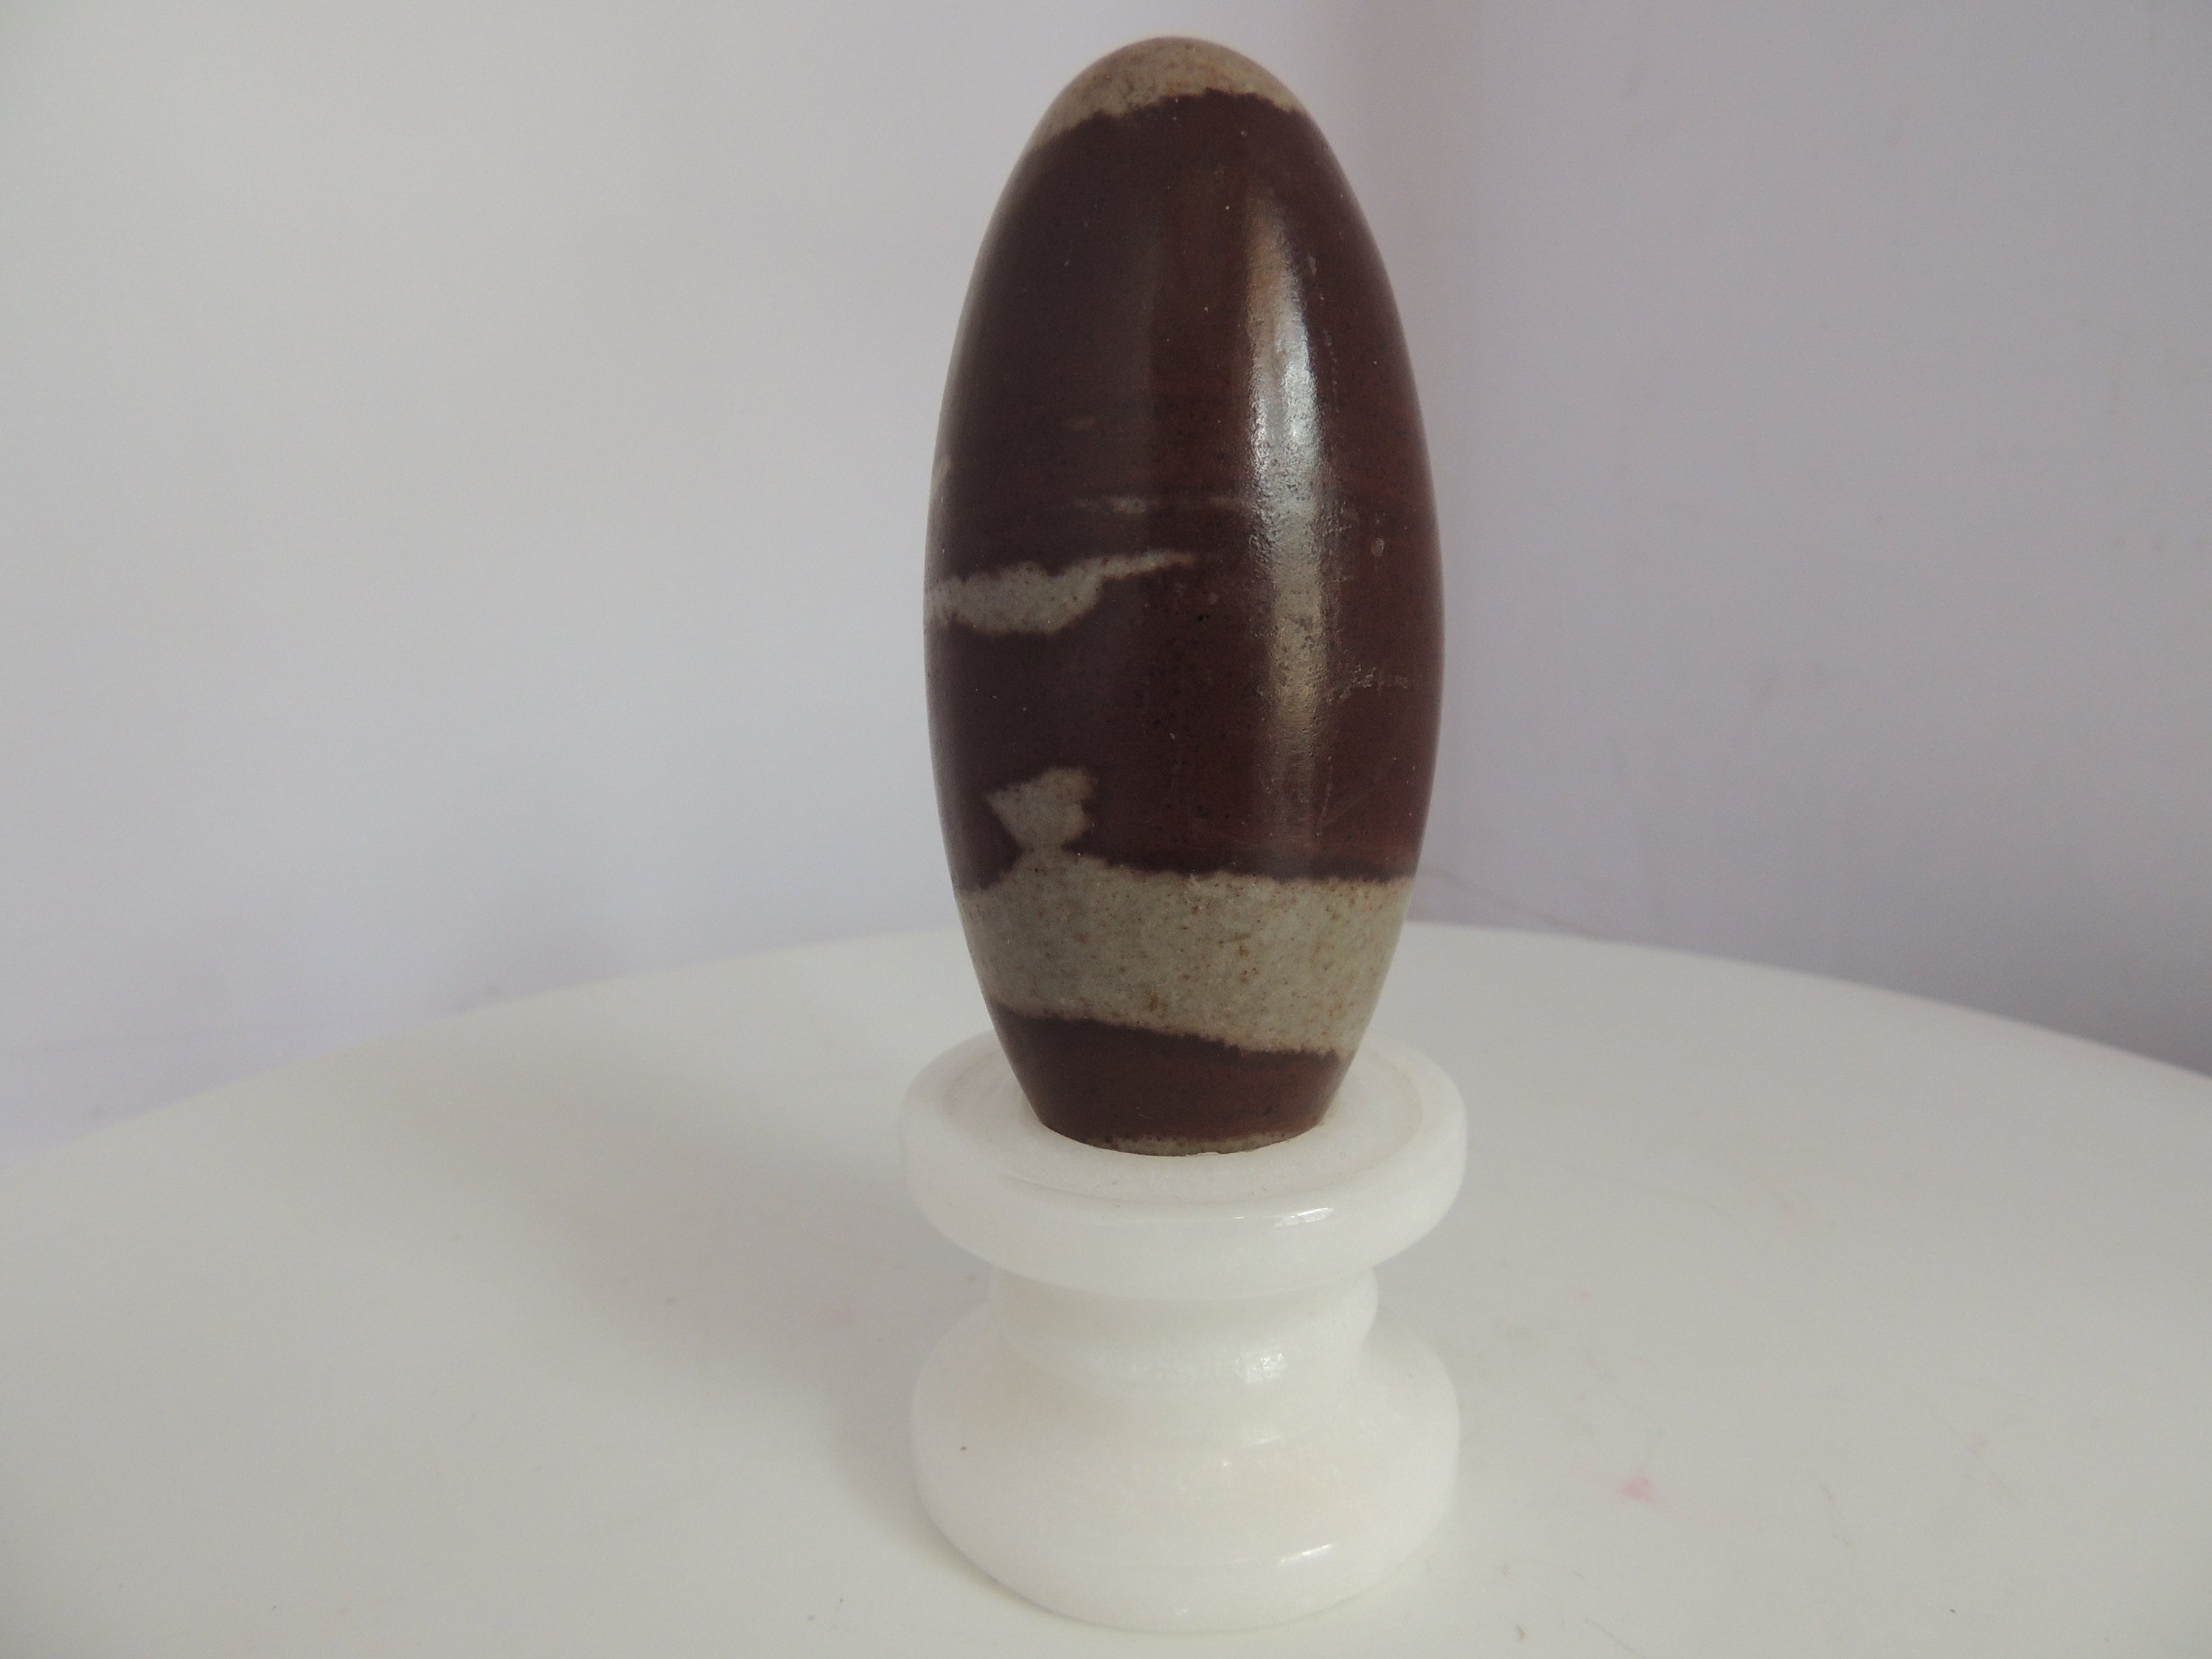 . NS-A217 1 2 4.5 Inches & Narmadeshwar Shiva lingam Combo- 2 White Marble Round Holder/Base For Both Lingams. 4 Inches